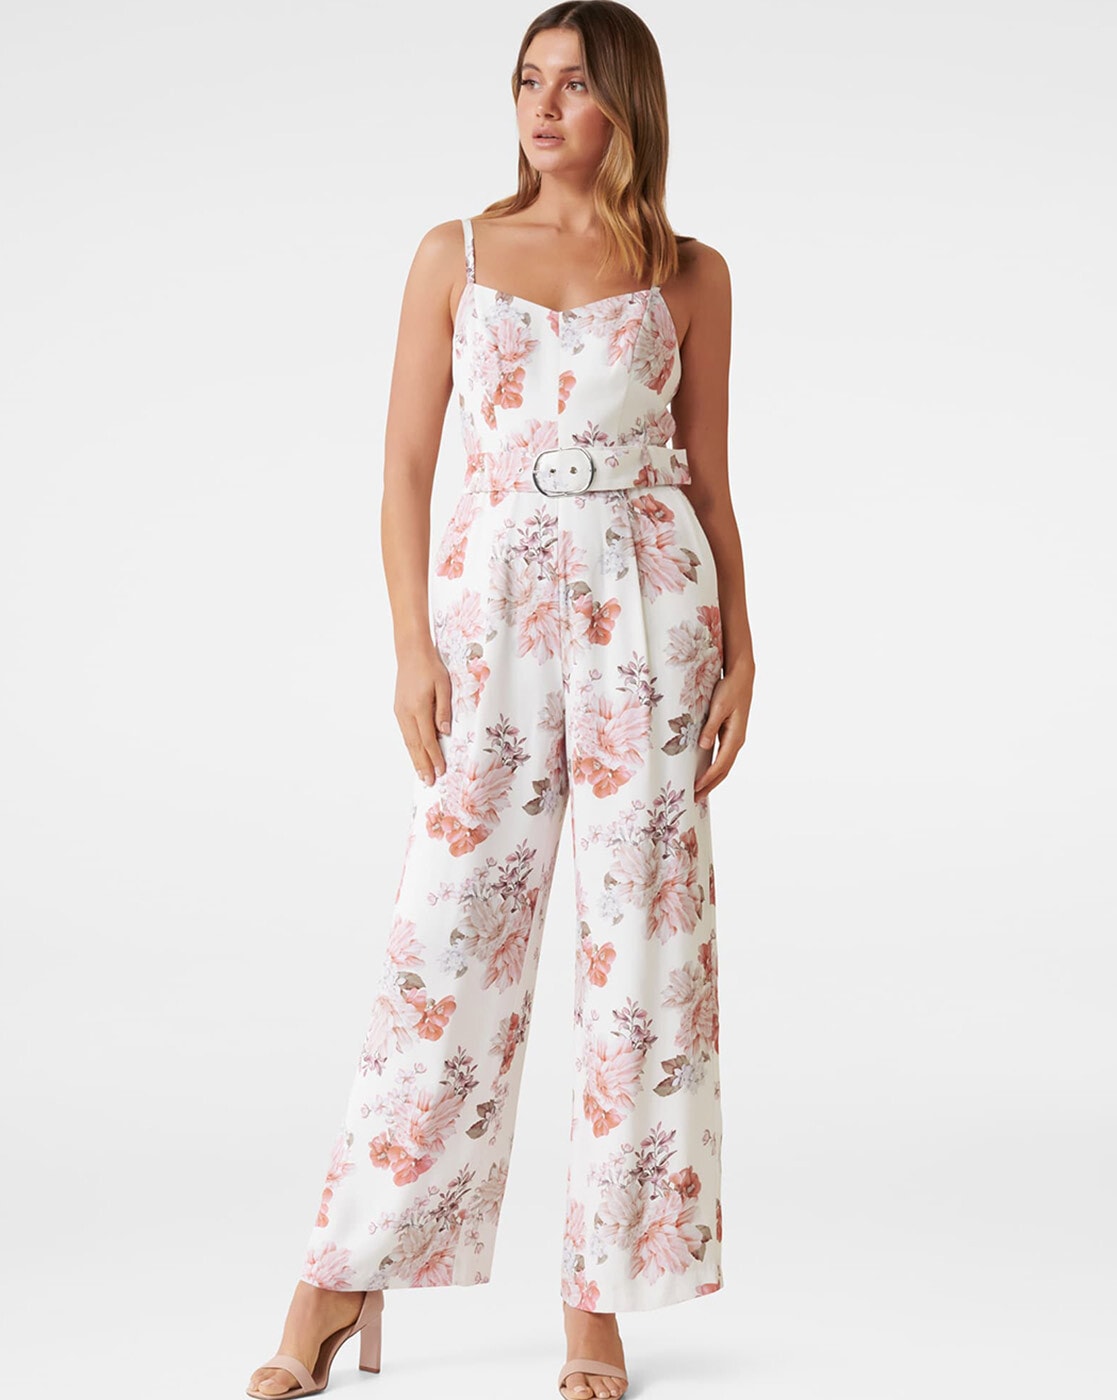 Shop Forever New Women's Jumpsuits With Belts up to 55% Off | DealDoodle